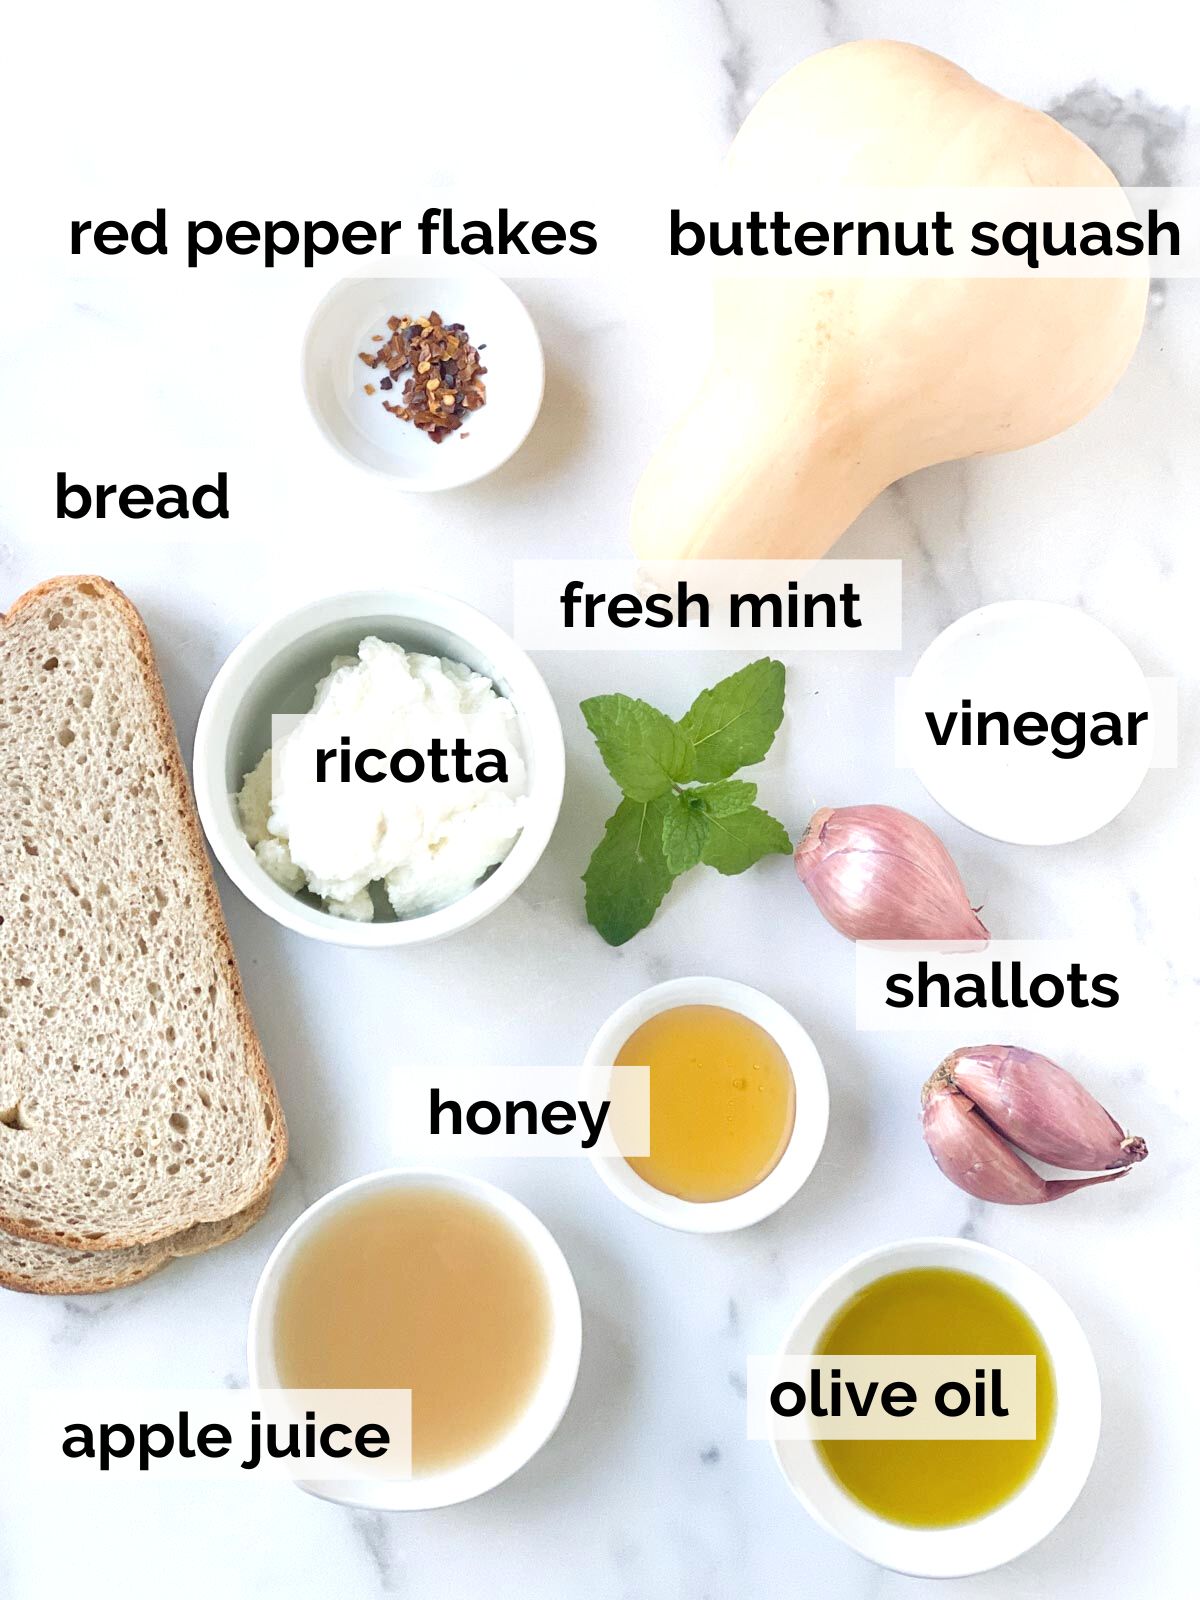 Ingredients for crostini on a table.